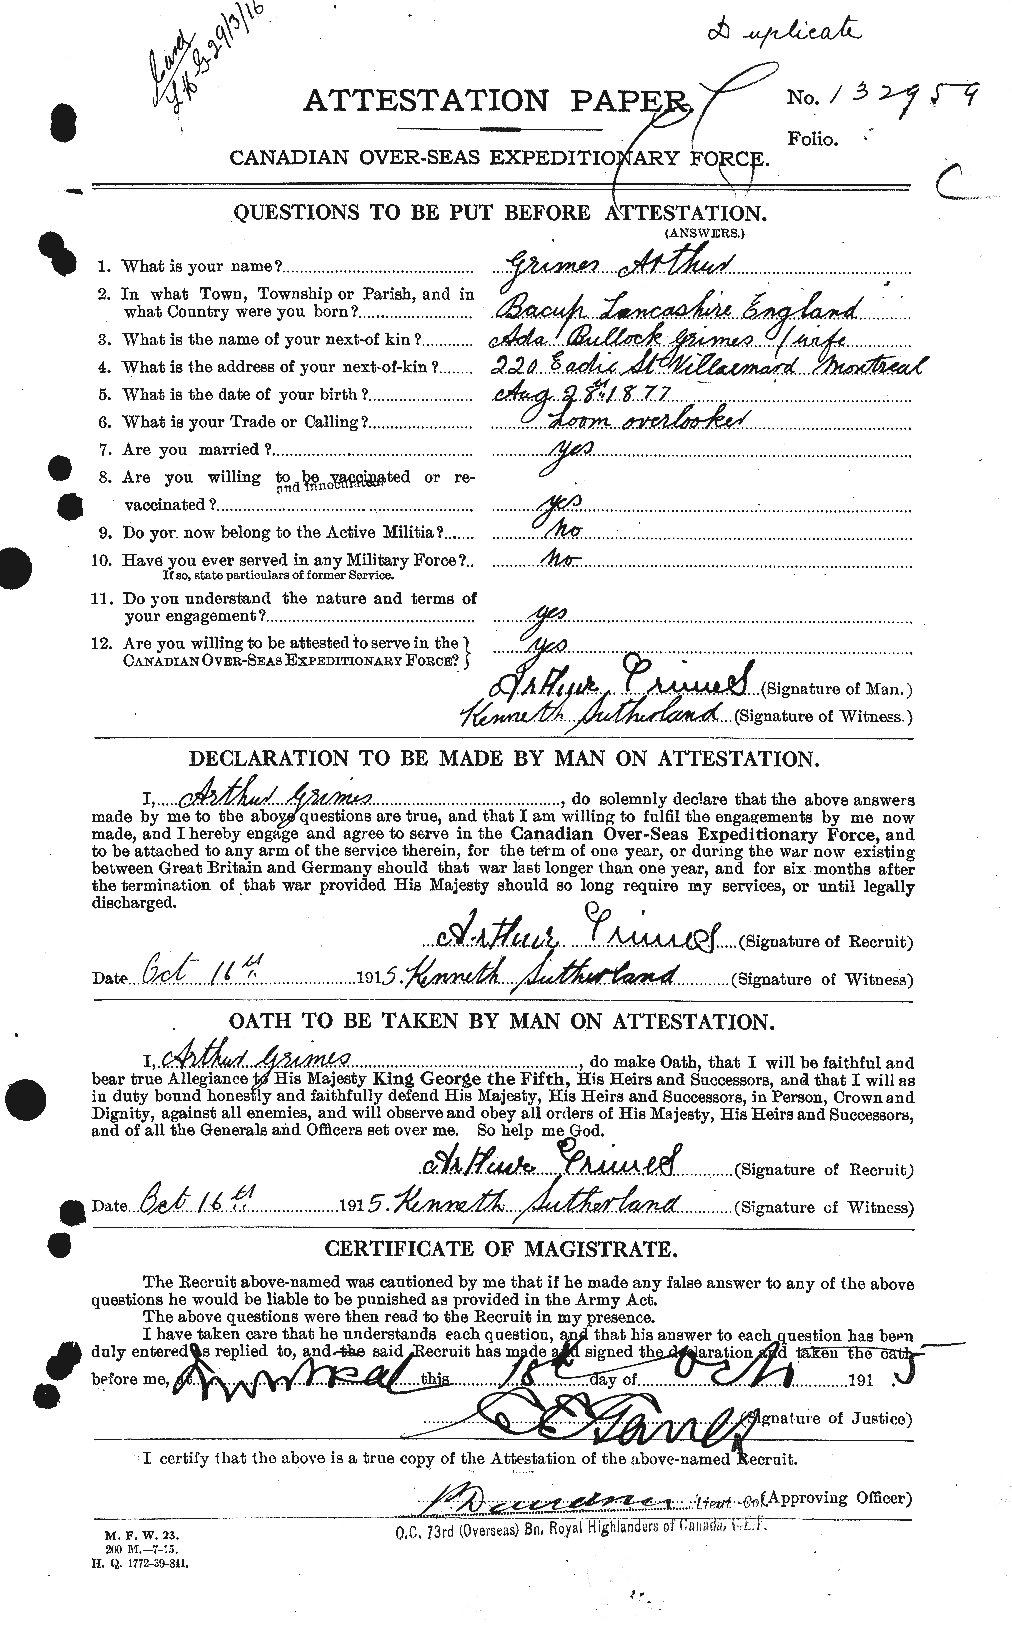 Personnel Records of the First World War - CEF 366009a